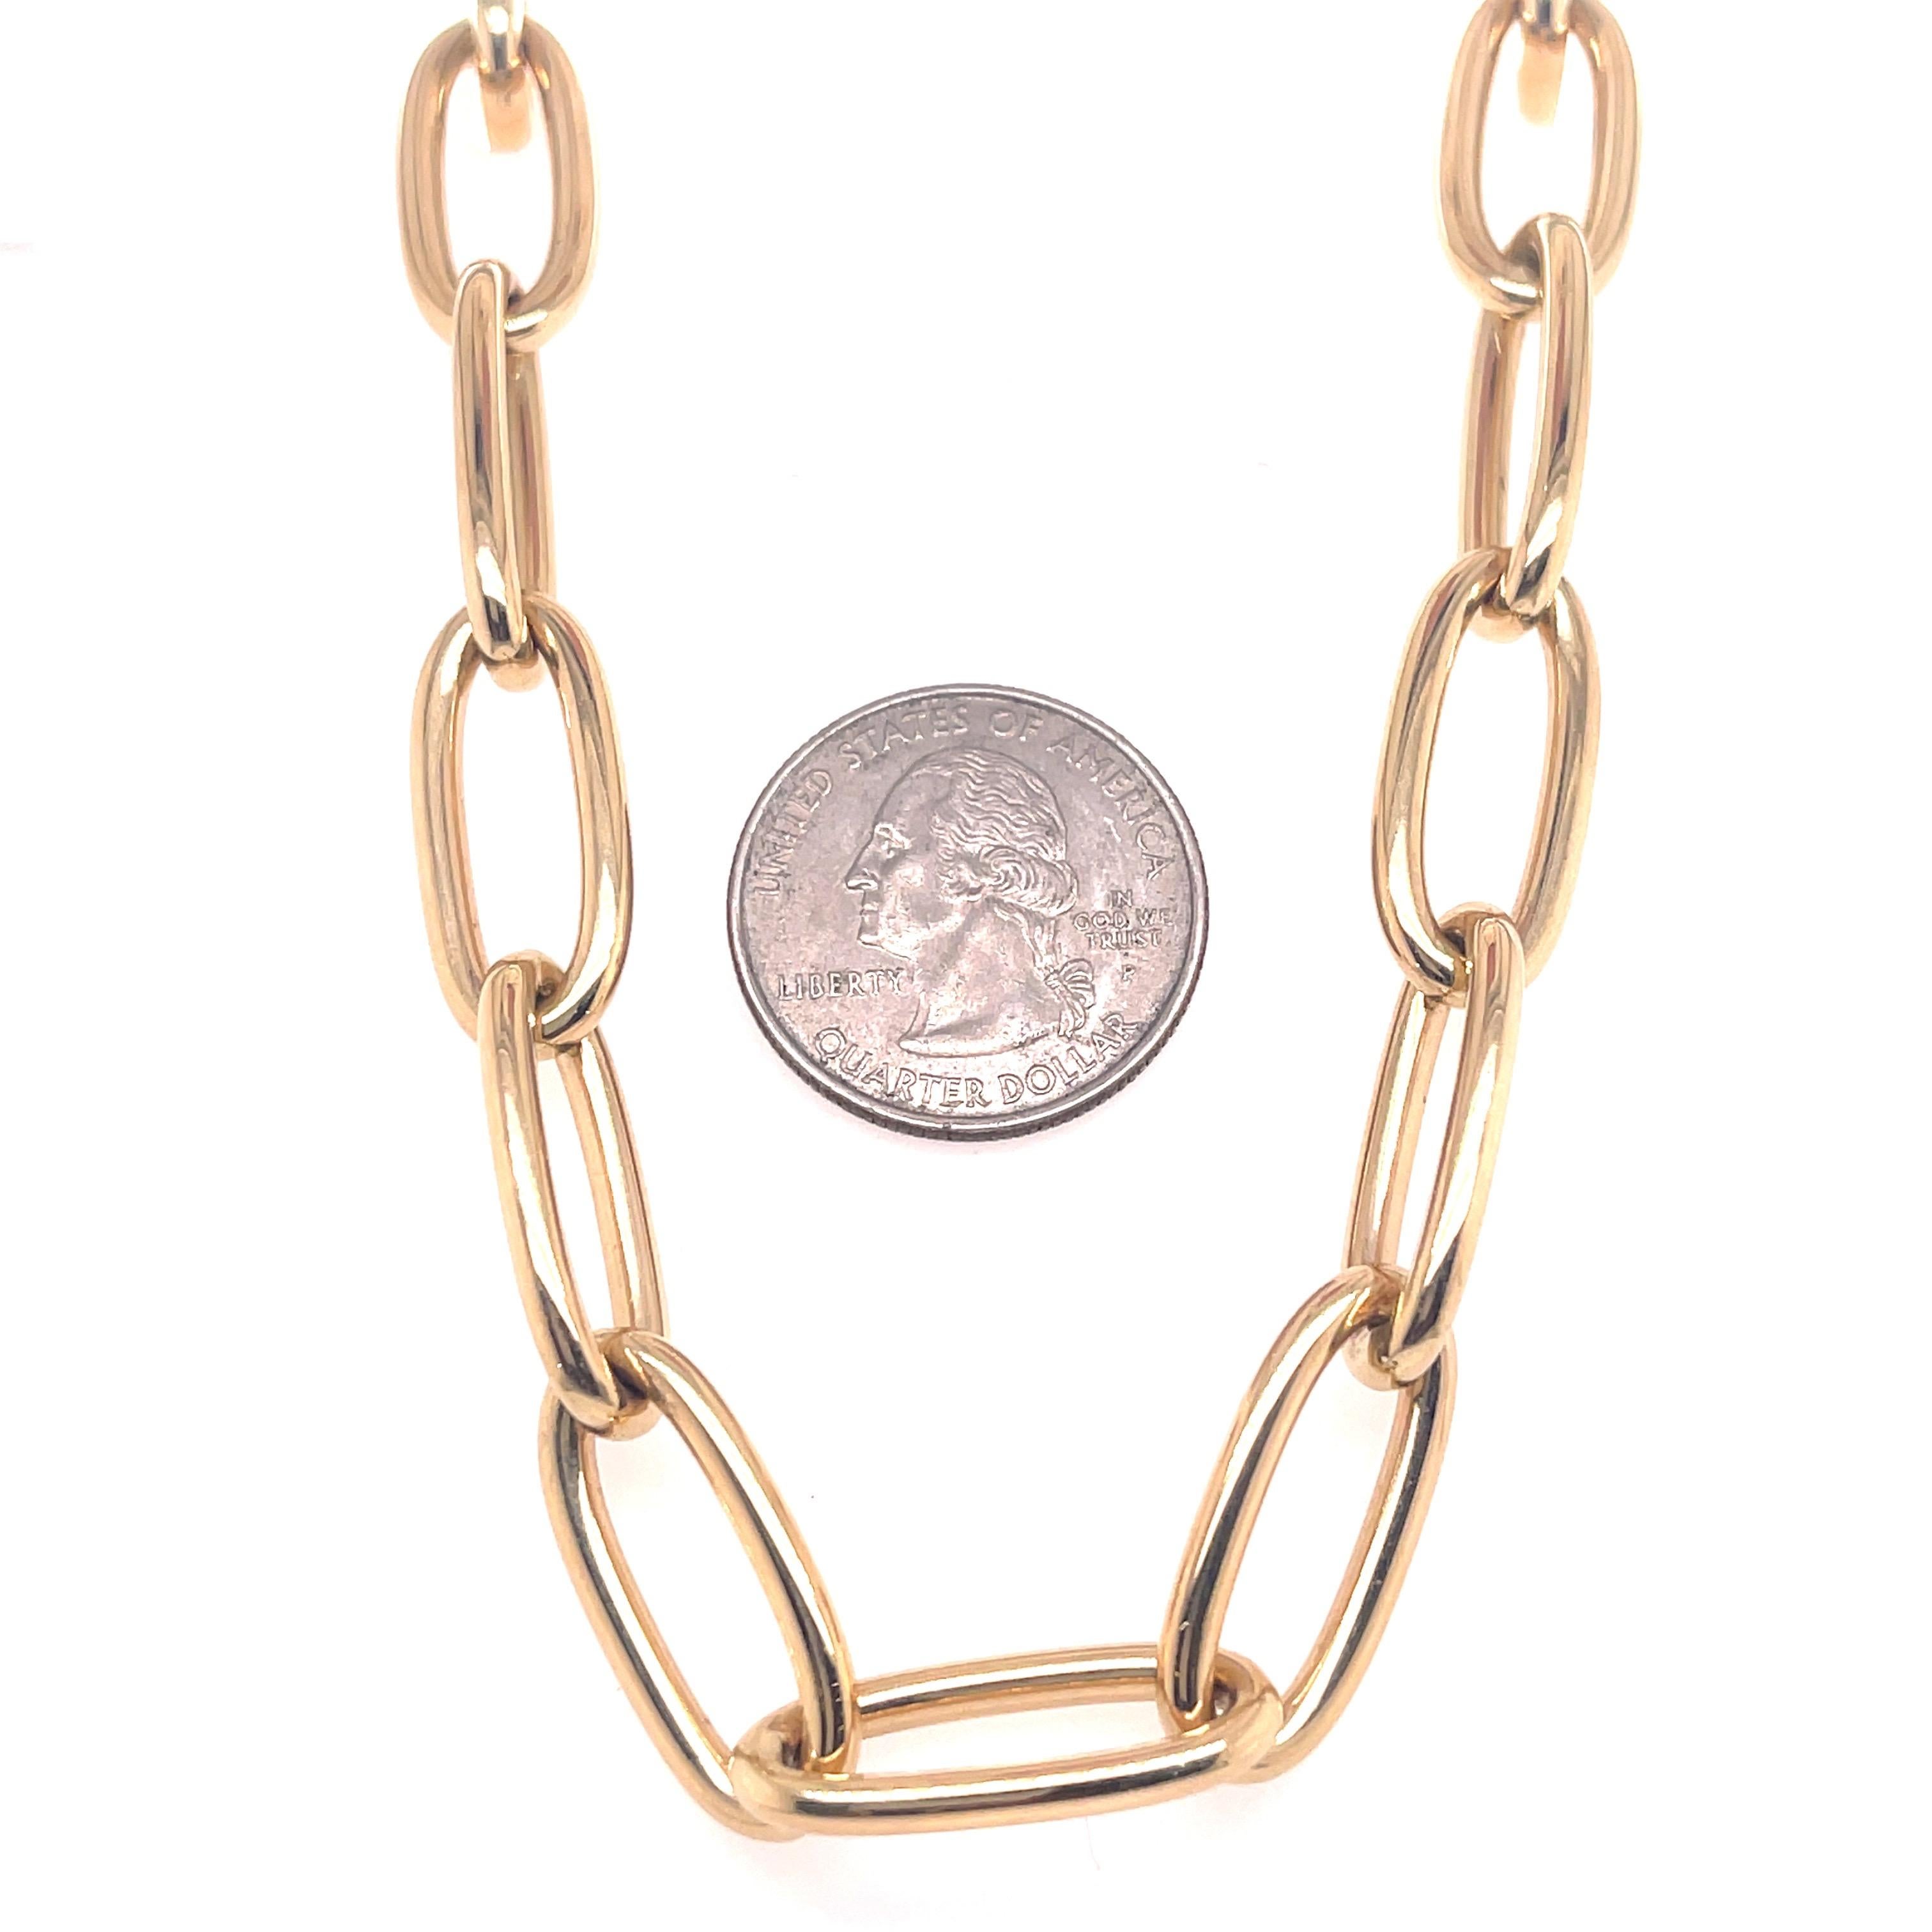 Oval shape link necklace weighing 25.2 grams in 14 karat yellow gold. Made in Italy. 